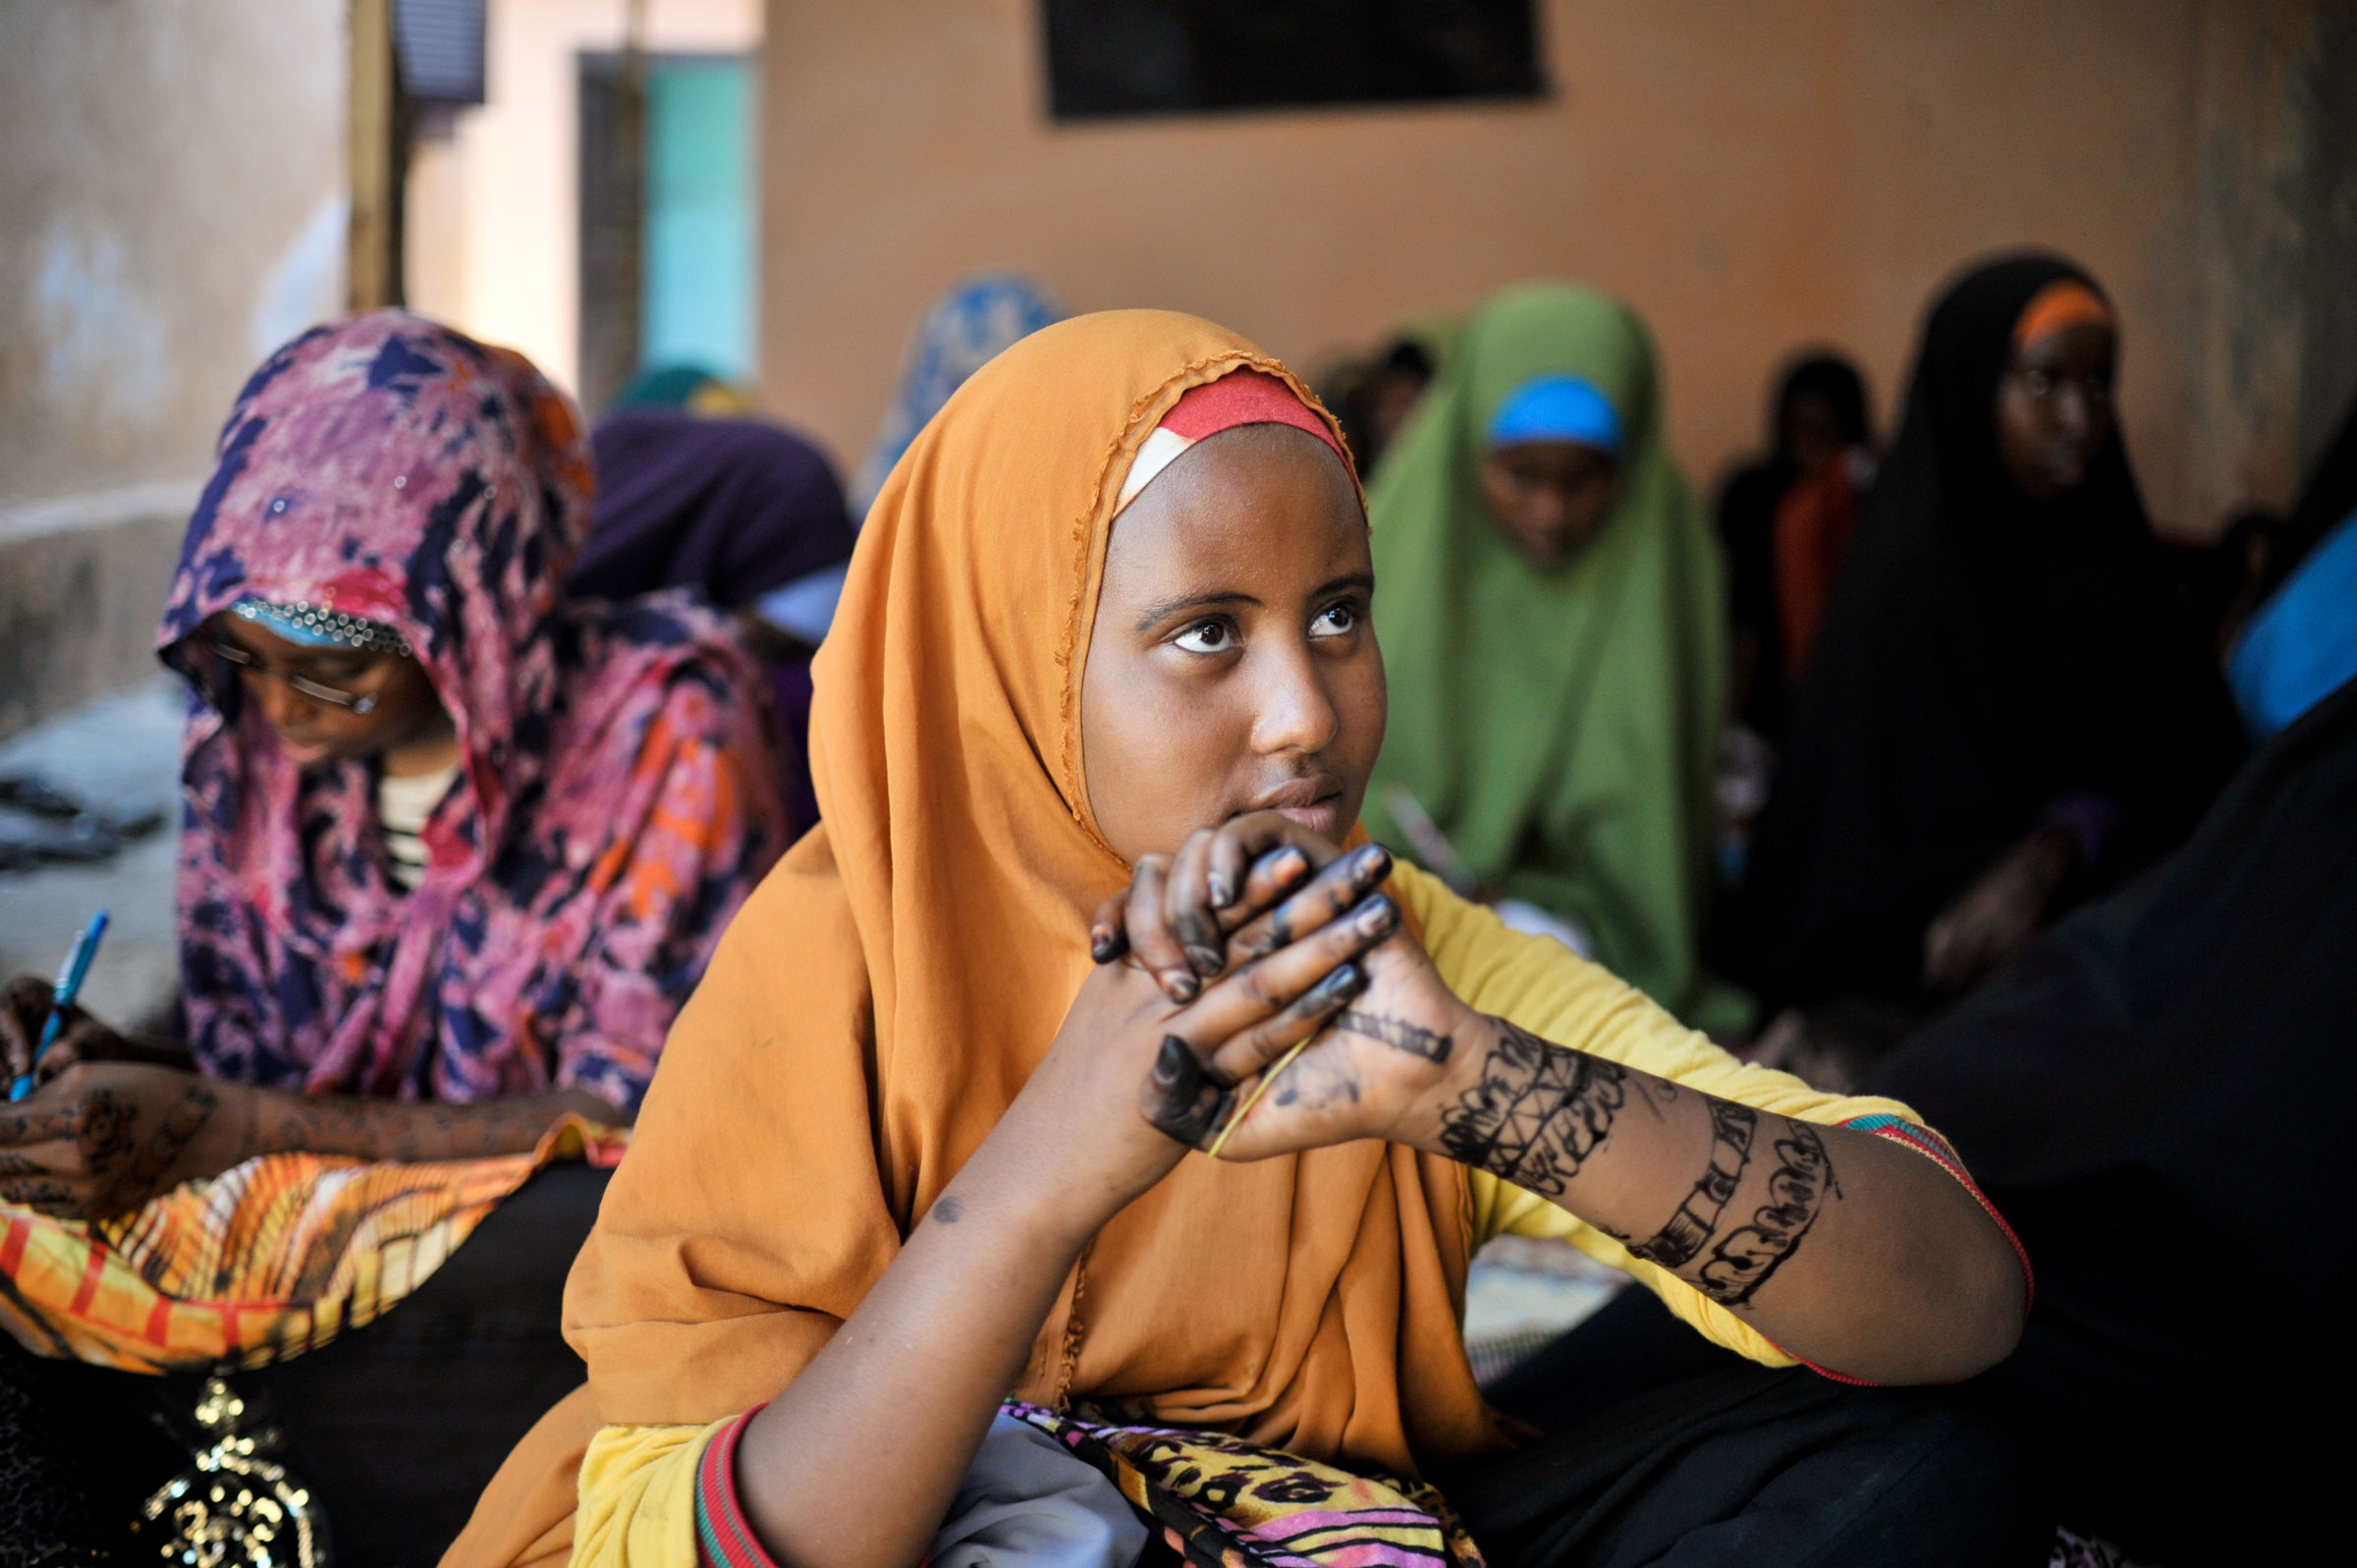 A girl at the Mother and Child Health Center in Mogadishu, Somalia, sits with other girls during a visit by the Special Representative of the Secretary-General on Sexual Violence in Conflict to the hospital on April 2.